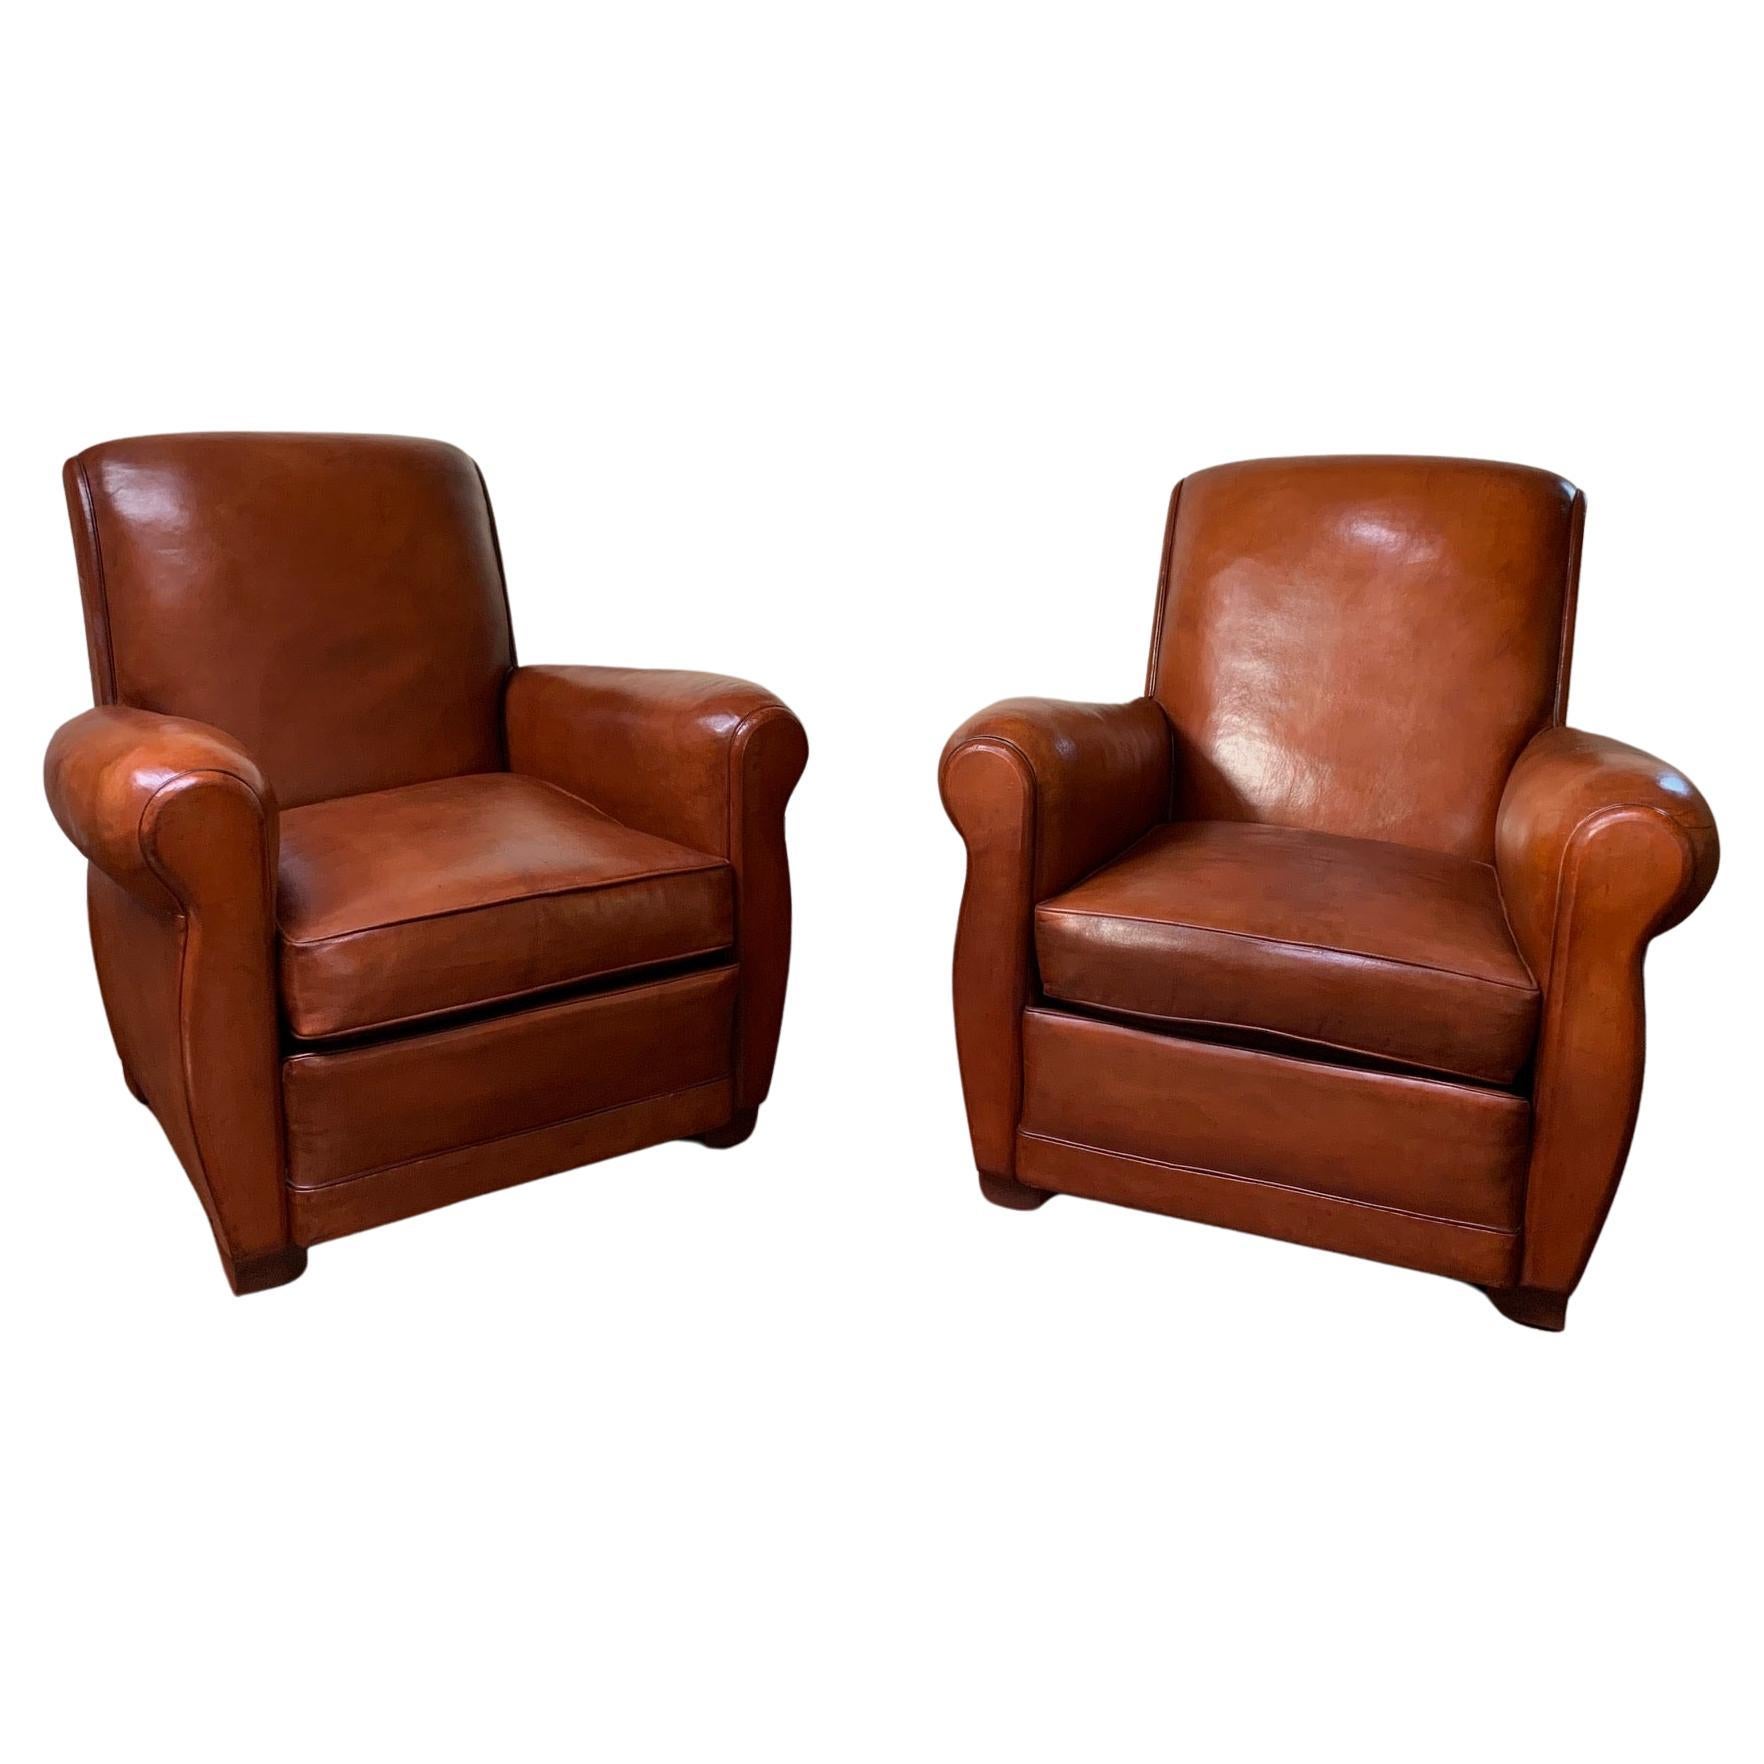 A Superb Pair of French, Leather Club Chairs, Havana Lounge Models Circa 1940's